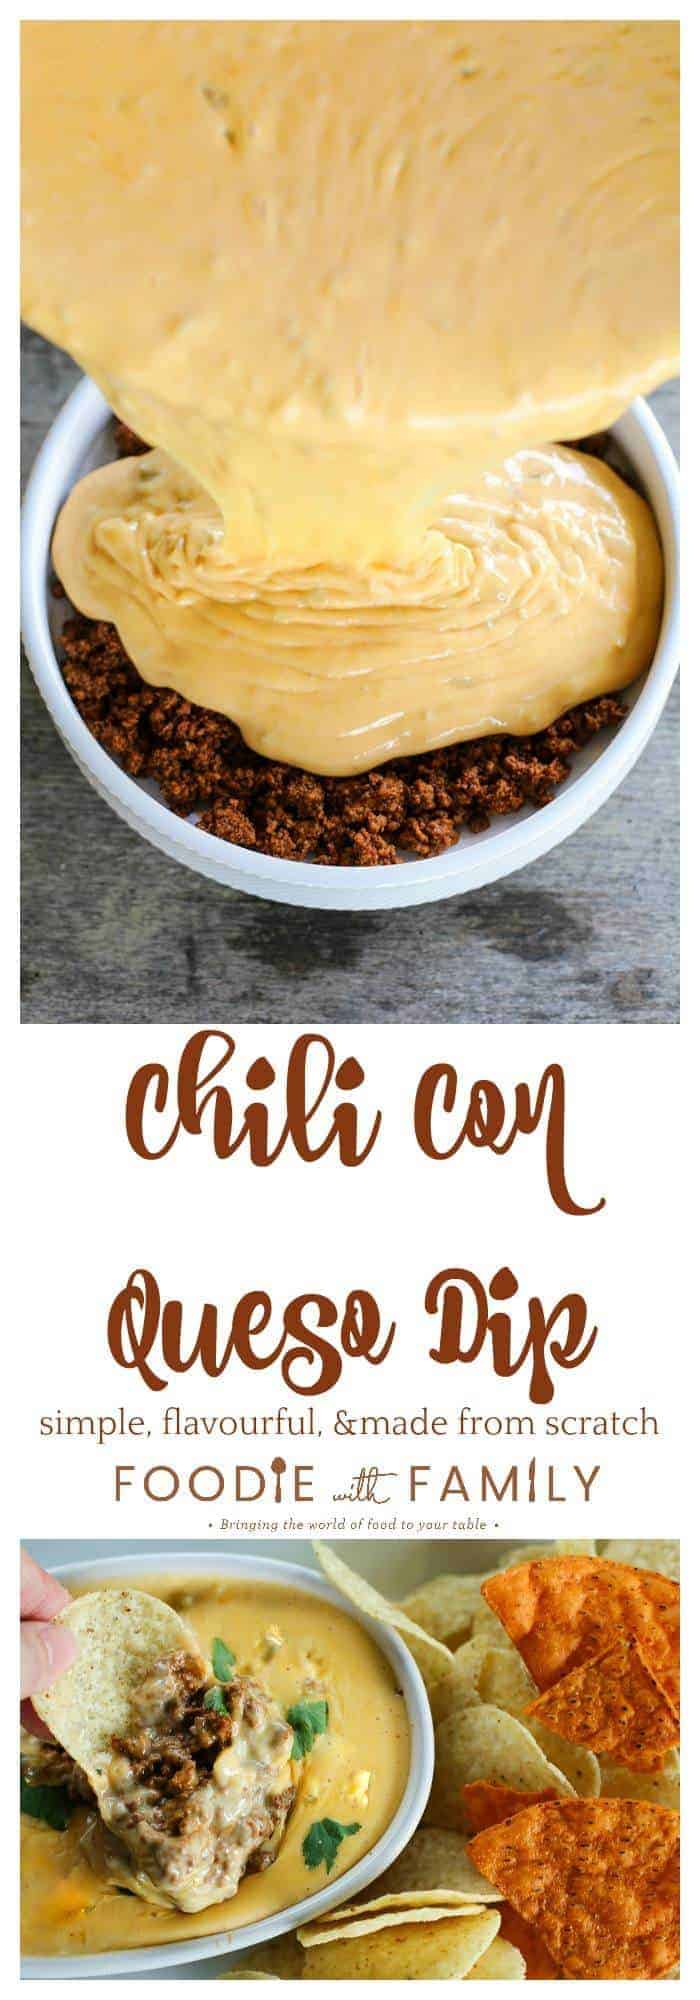 Ooey-gooey, chile studded heavenly queso smothers your favourite chili for a bowl of the ultimate Chili Con Queso Dip. Get those chips ready to go!